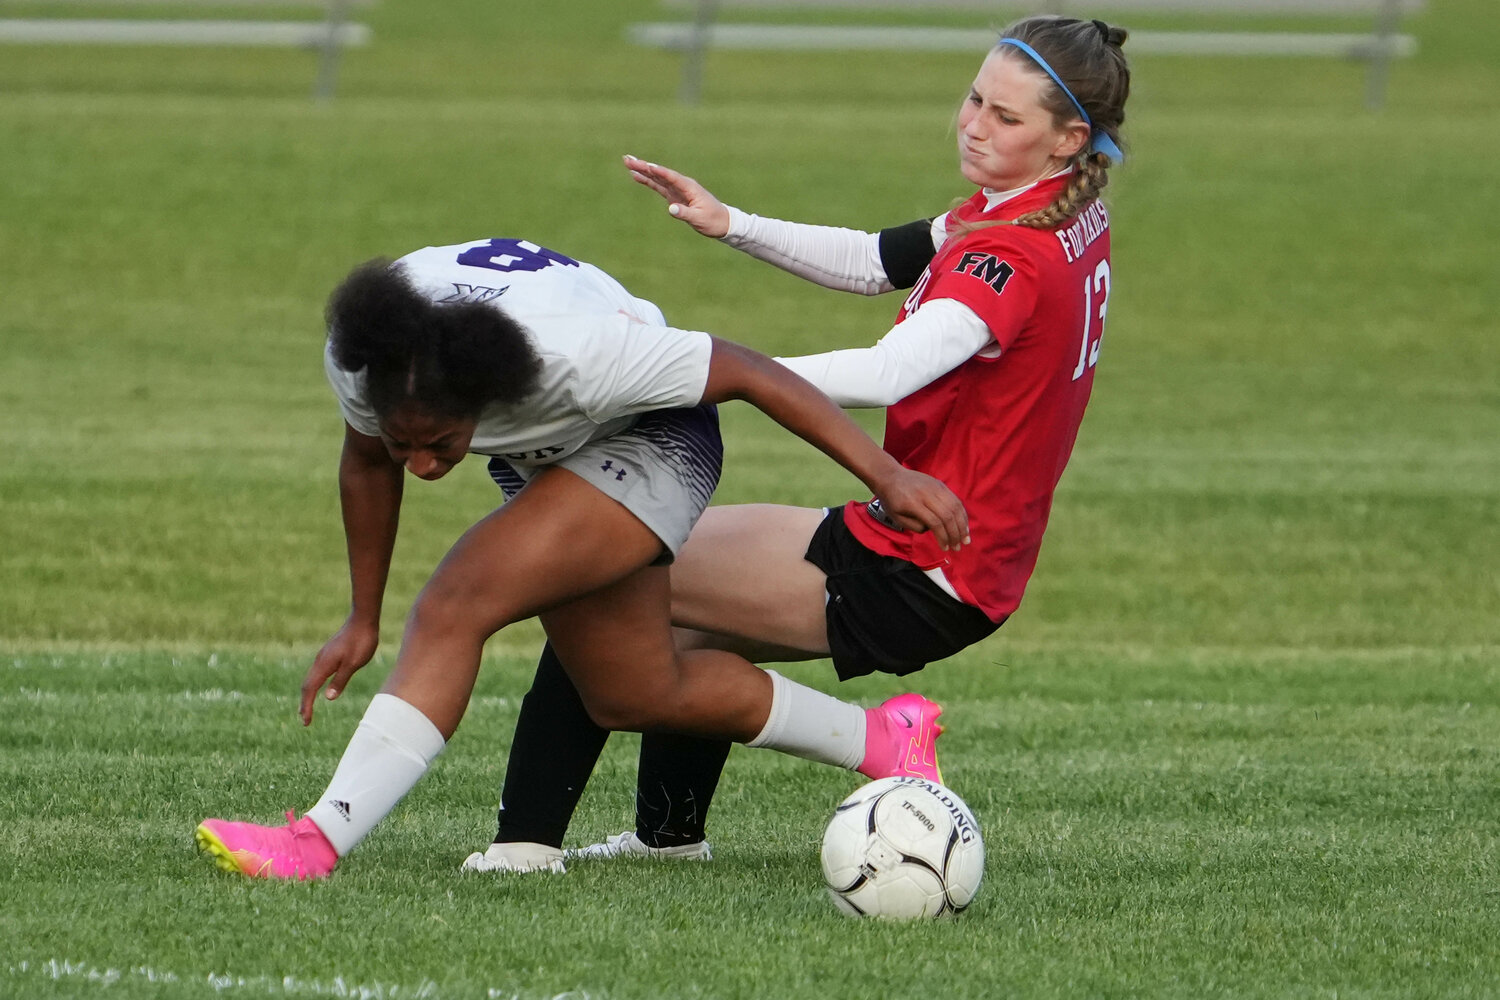 Fort Madison High School's Mary Kate Bendlage (13) collides with Keokuk's Jalyiah Gardner (8) during their Class 2A Region 5 quarterfinal game against Keokuk High School, Friday, May 19, 2023 at Fort Madison's Baxter Sports Complex. Fort Madison won 6-0.